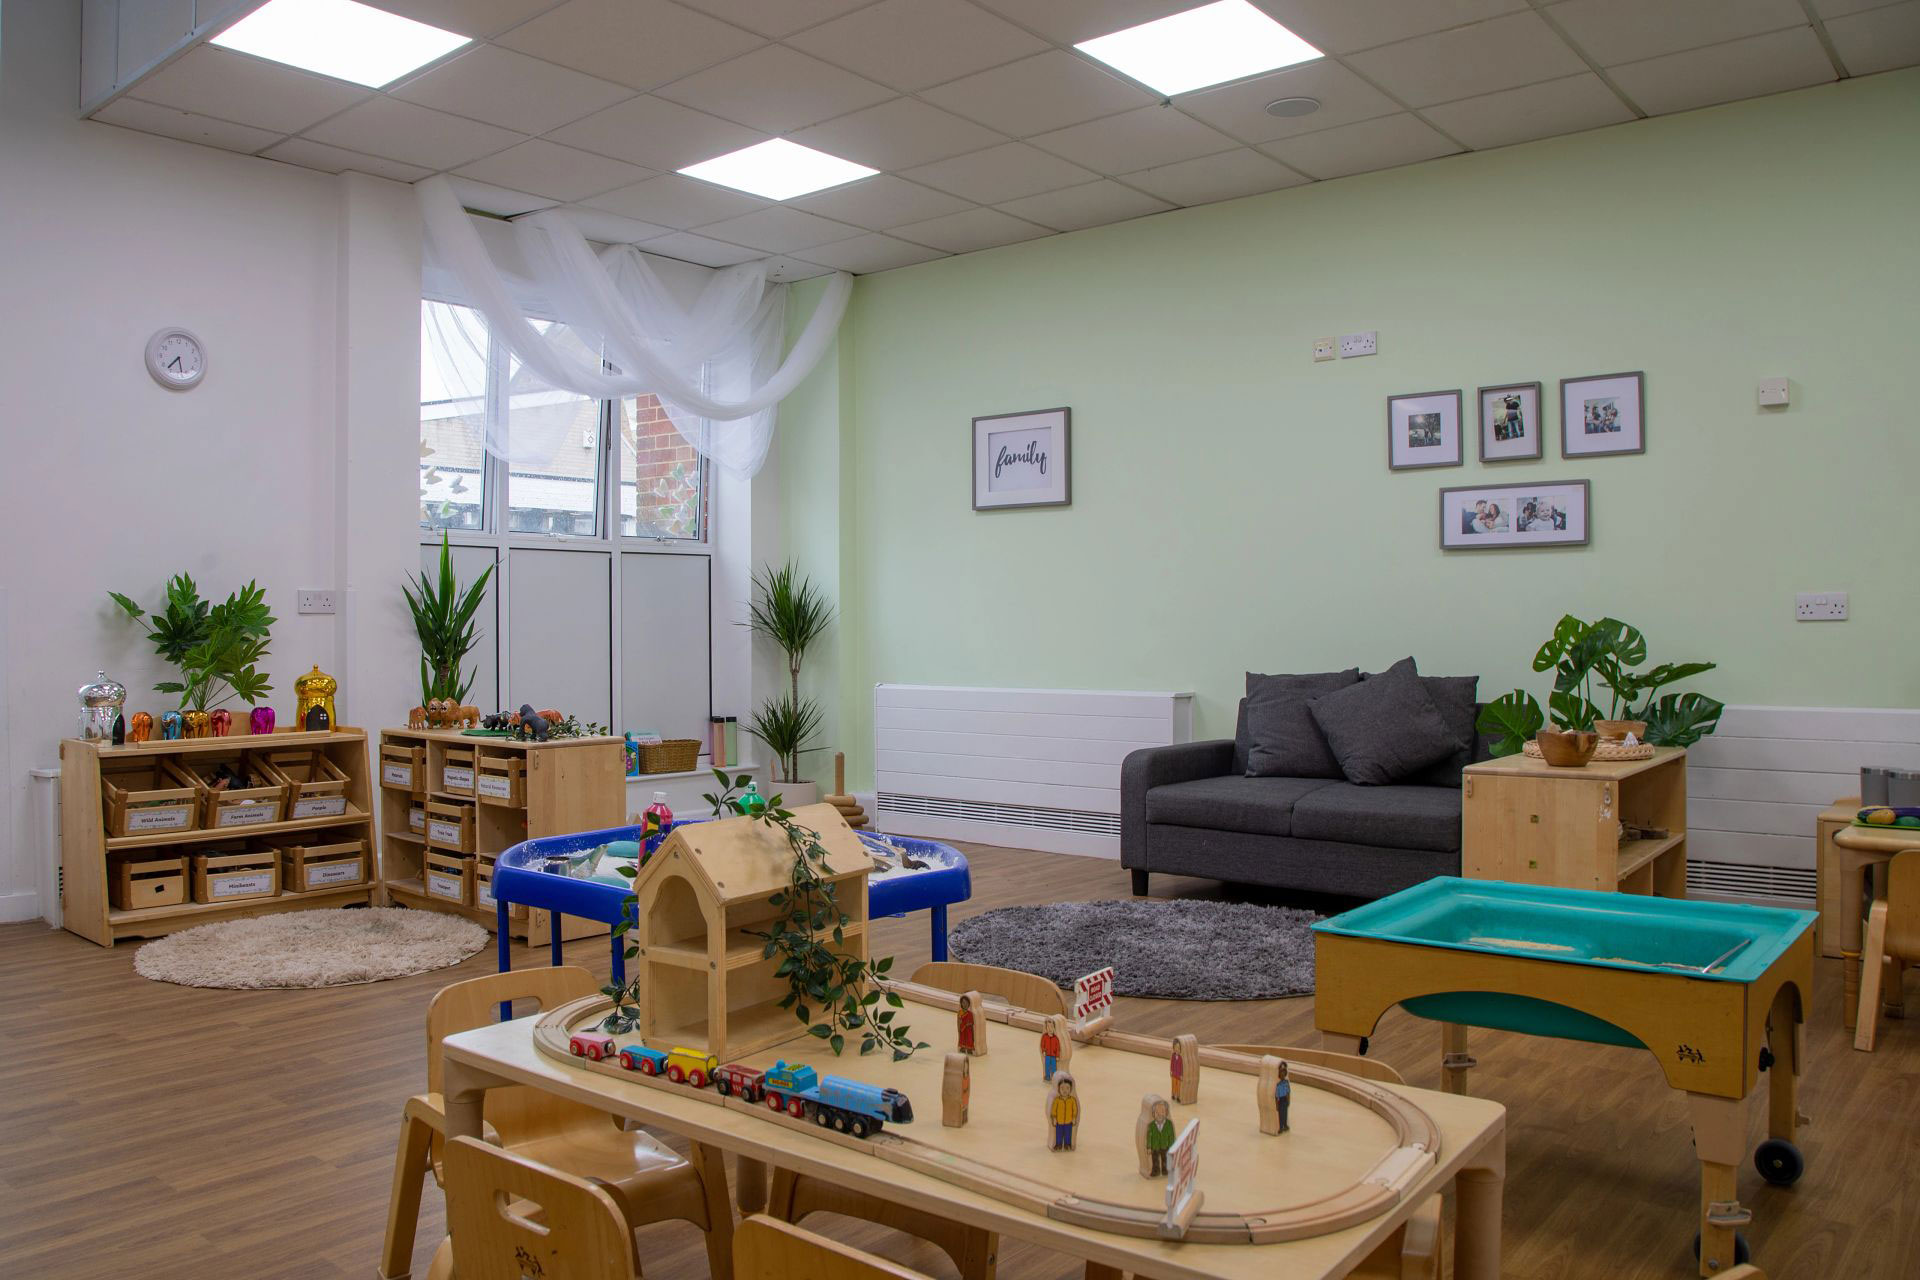 West Norwood Day Nursery and Preschool Toddlers